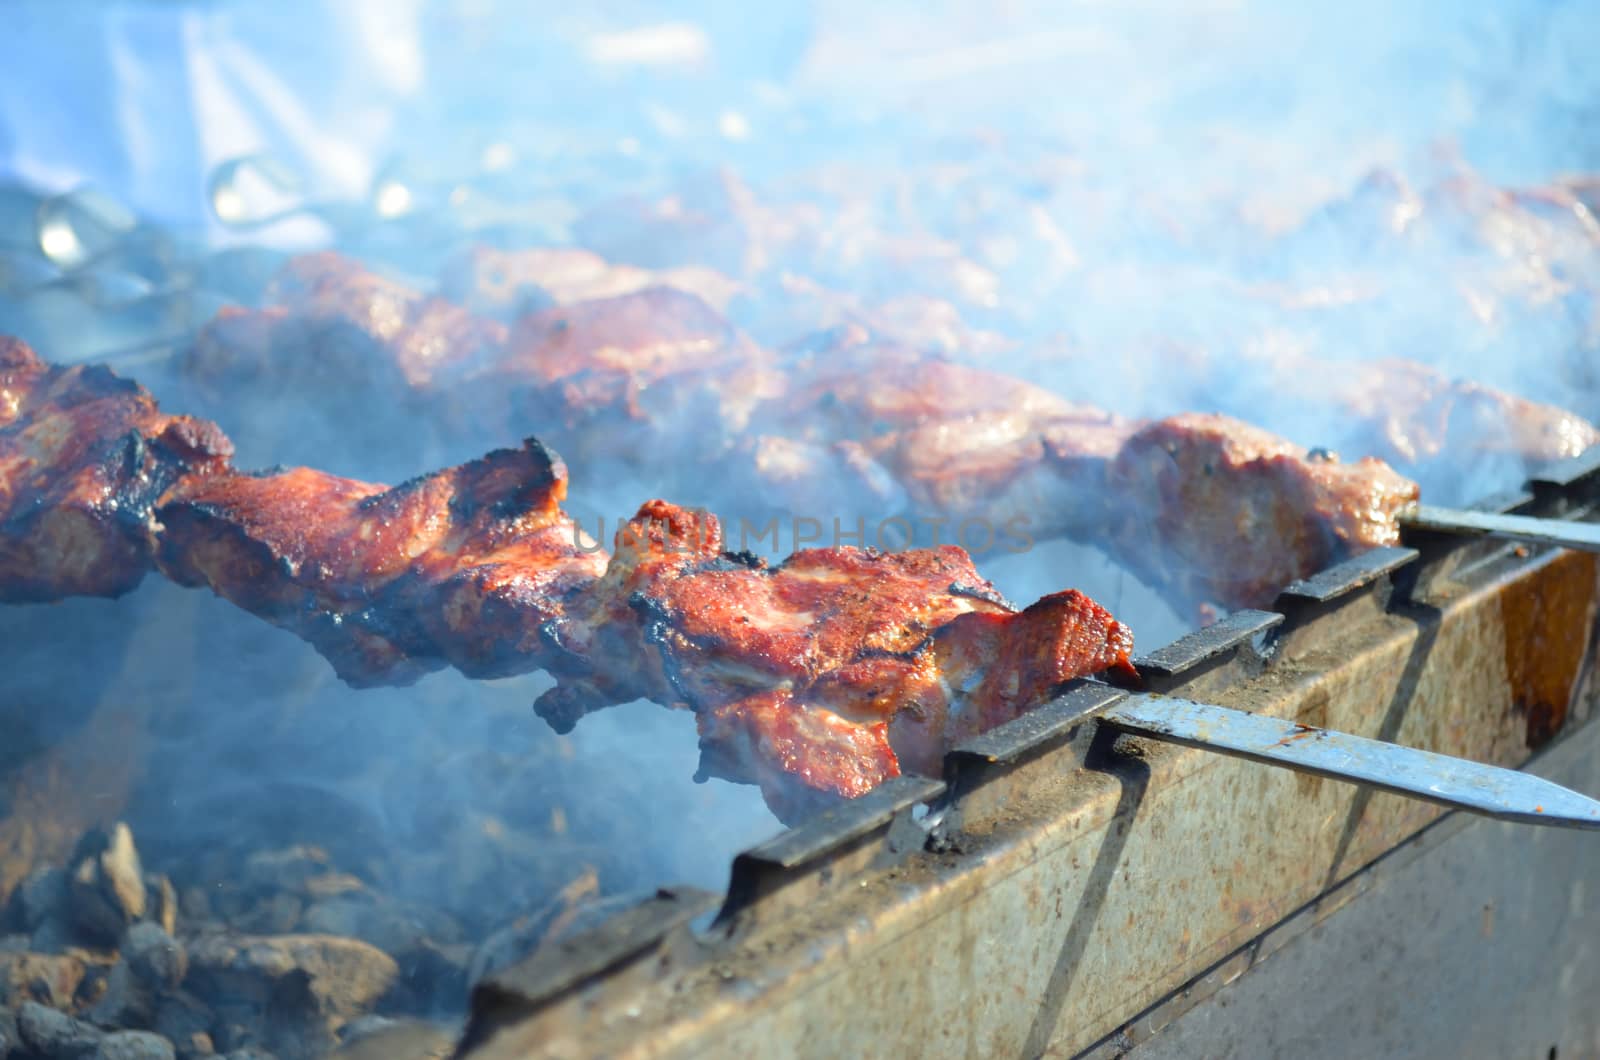 Meat is fried on skewers over charcoal on the grill